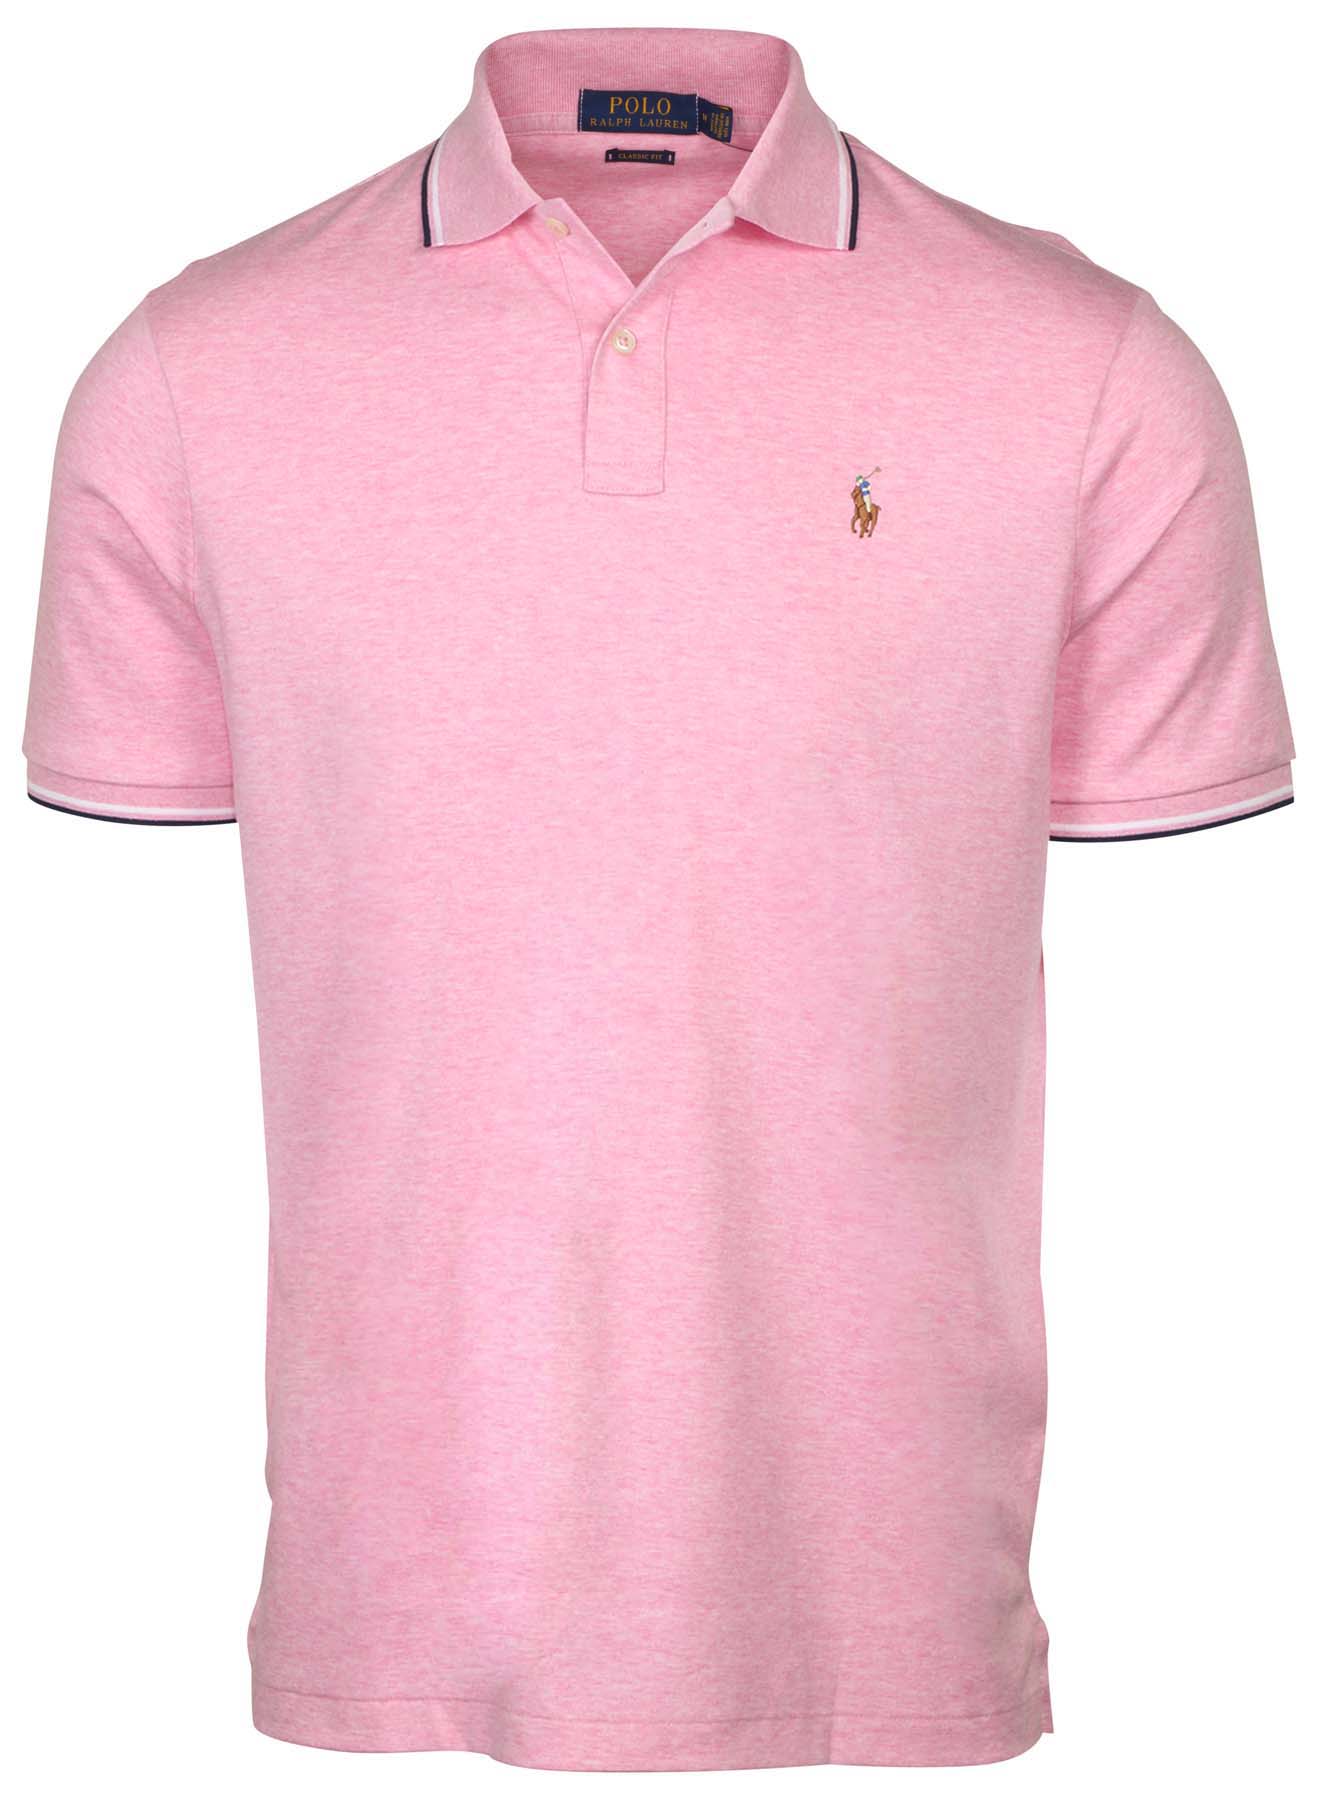 Polo RL Men's Classic Fit Trim Soft Touch Polo | eBay